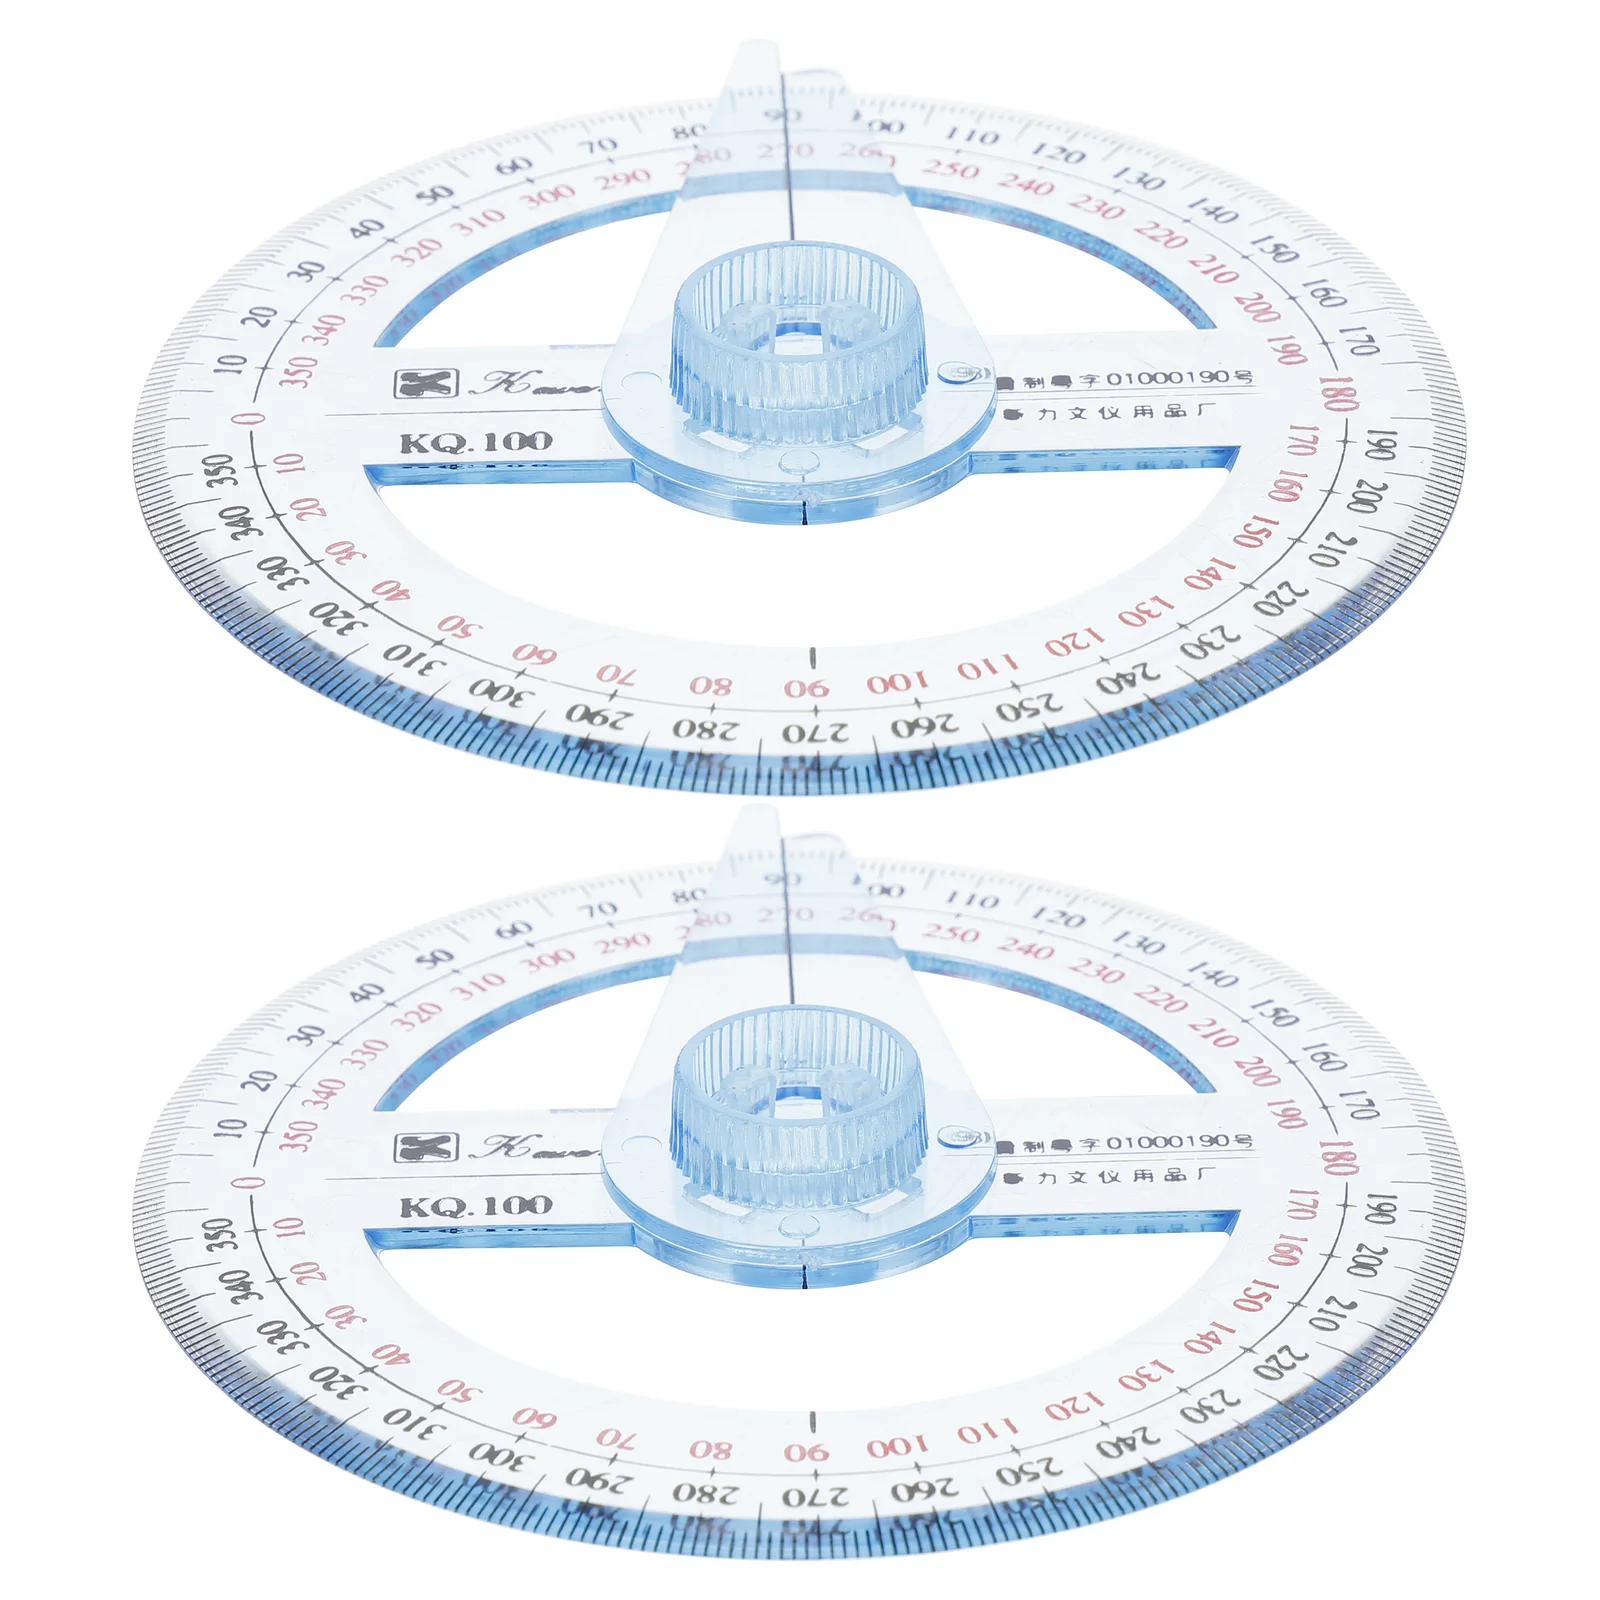 

2pcs Circle Protractor 360 Degree Protractor Ruler Math Geometry Tools for School Classroom Office Drafting Measuring Supplies